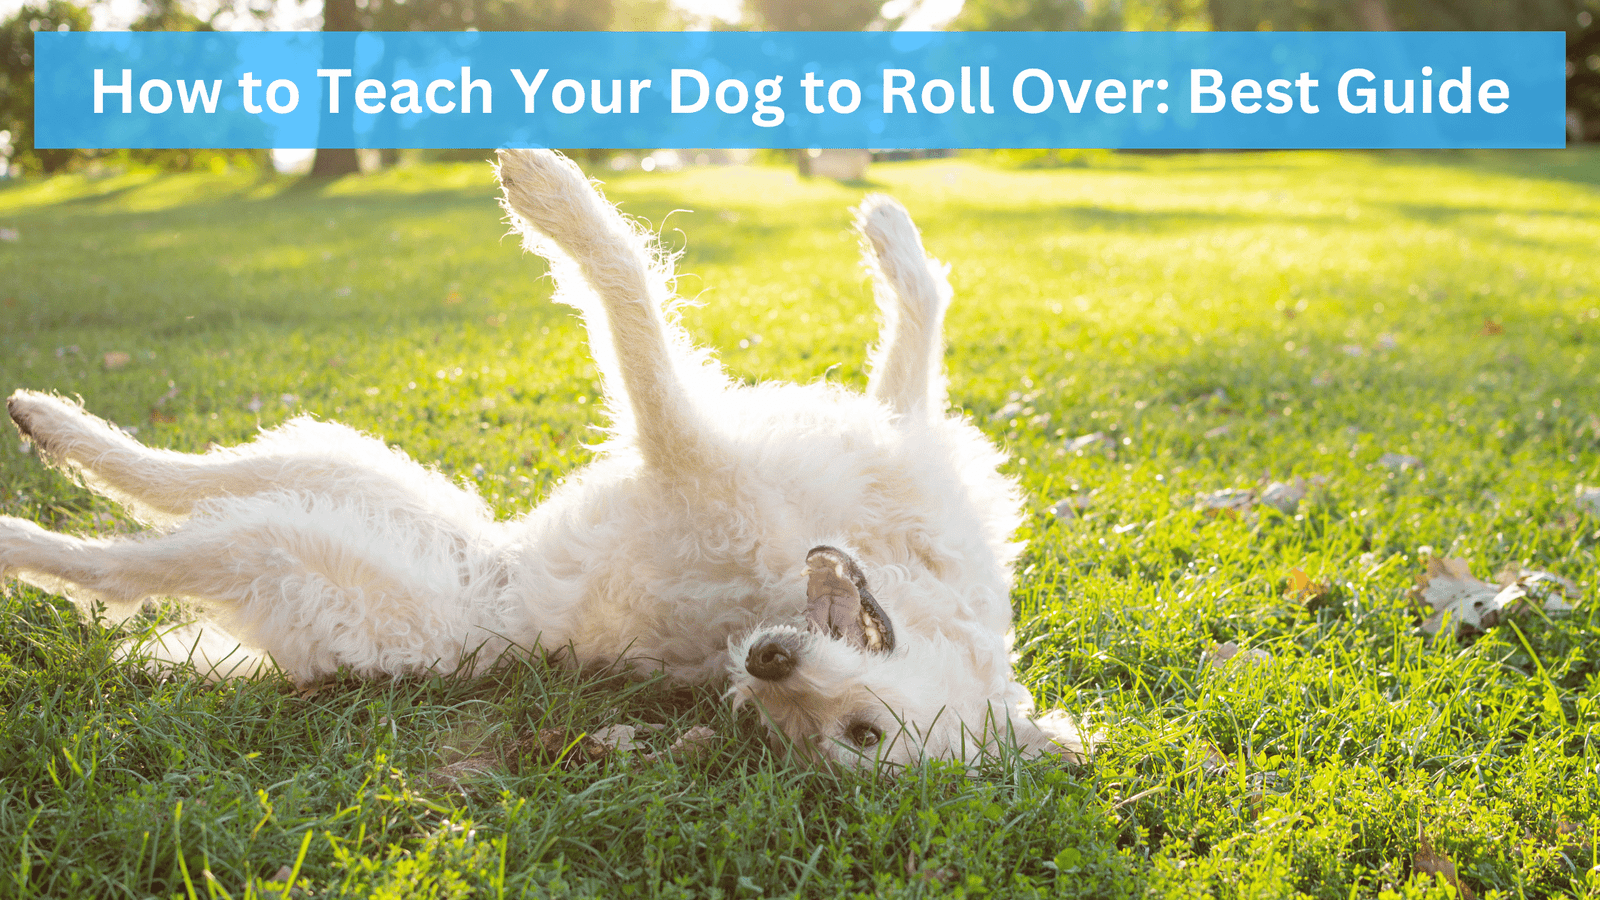 Teach Your Dog to Roll Over